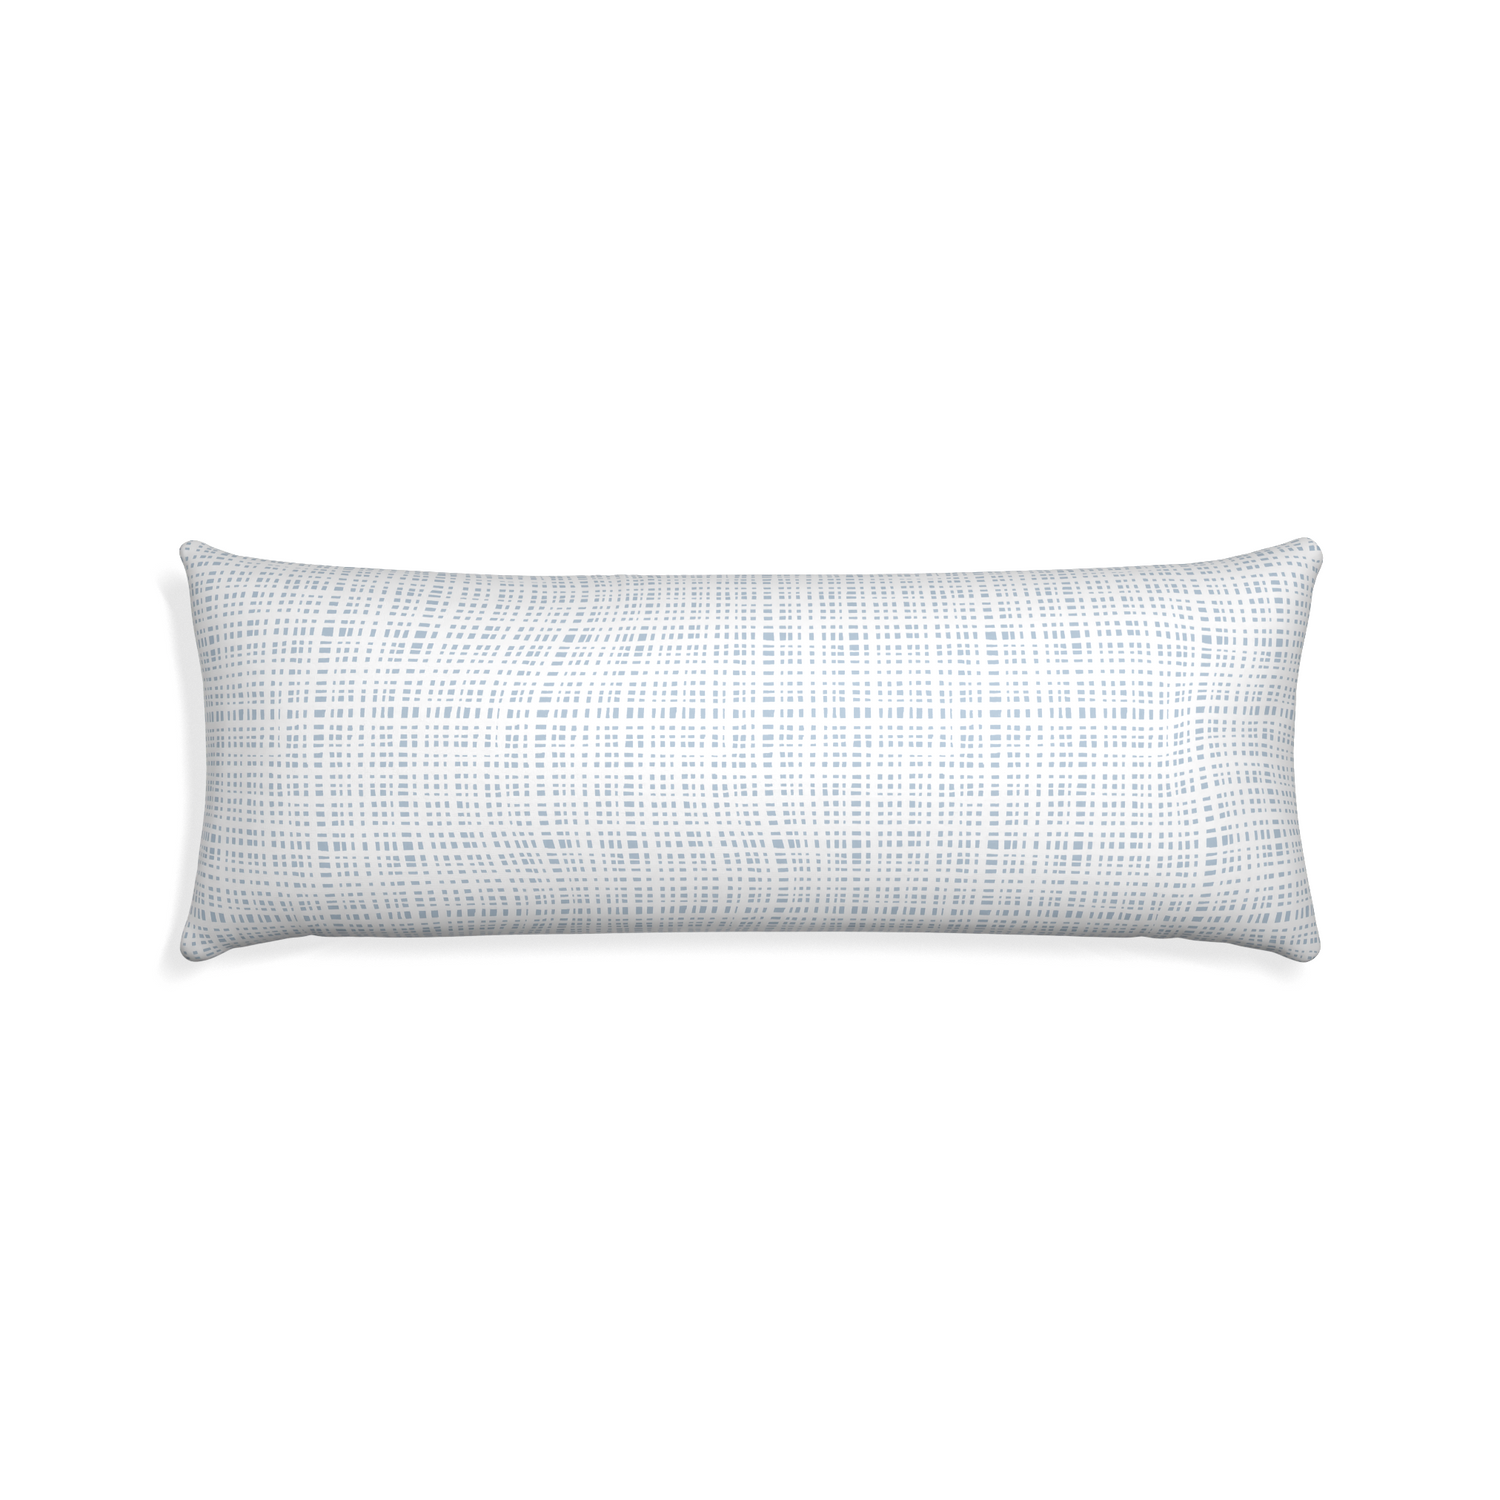 Xl-lumbar ginger custom plaid sky bluepillow with none on white background